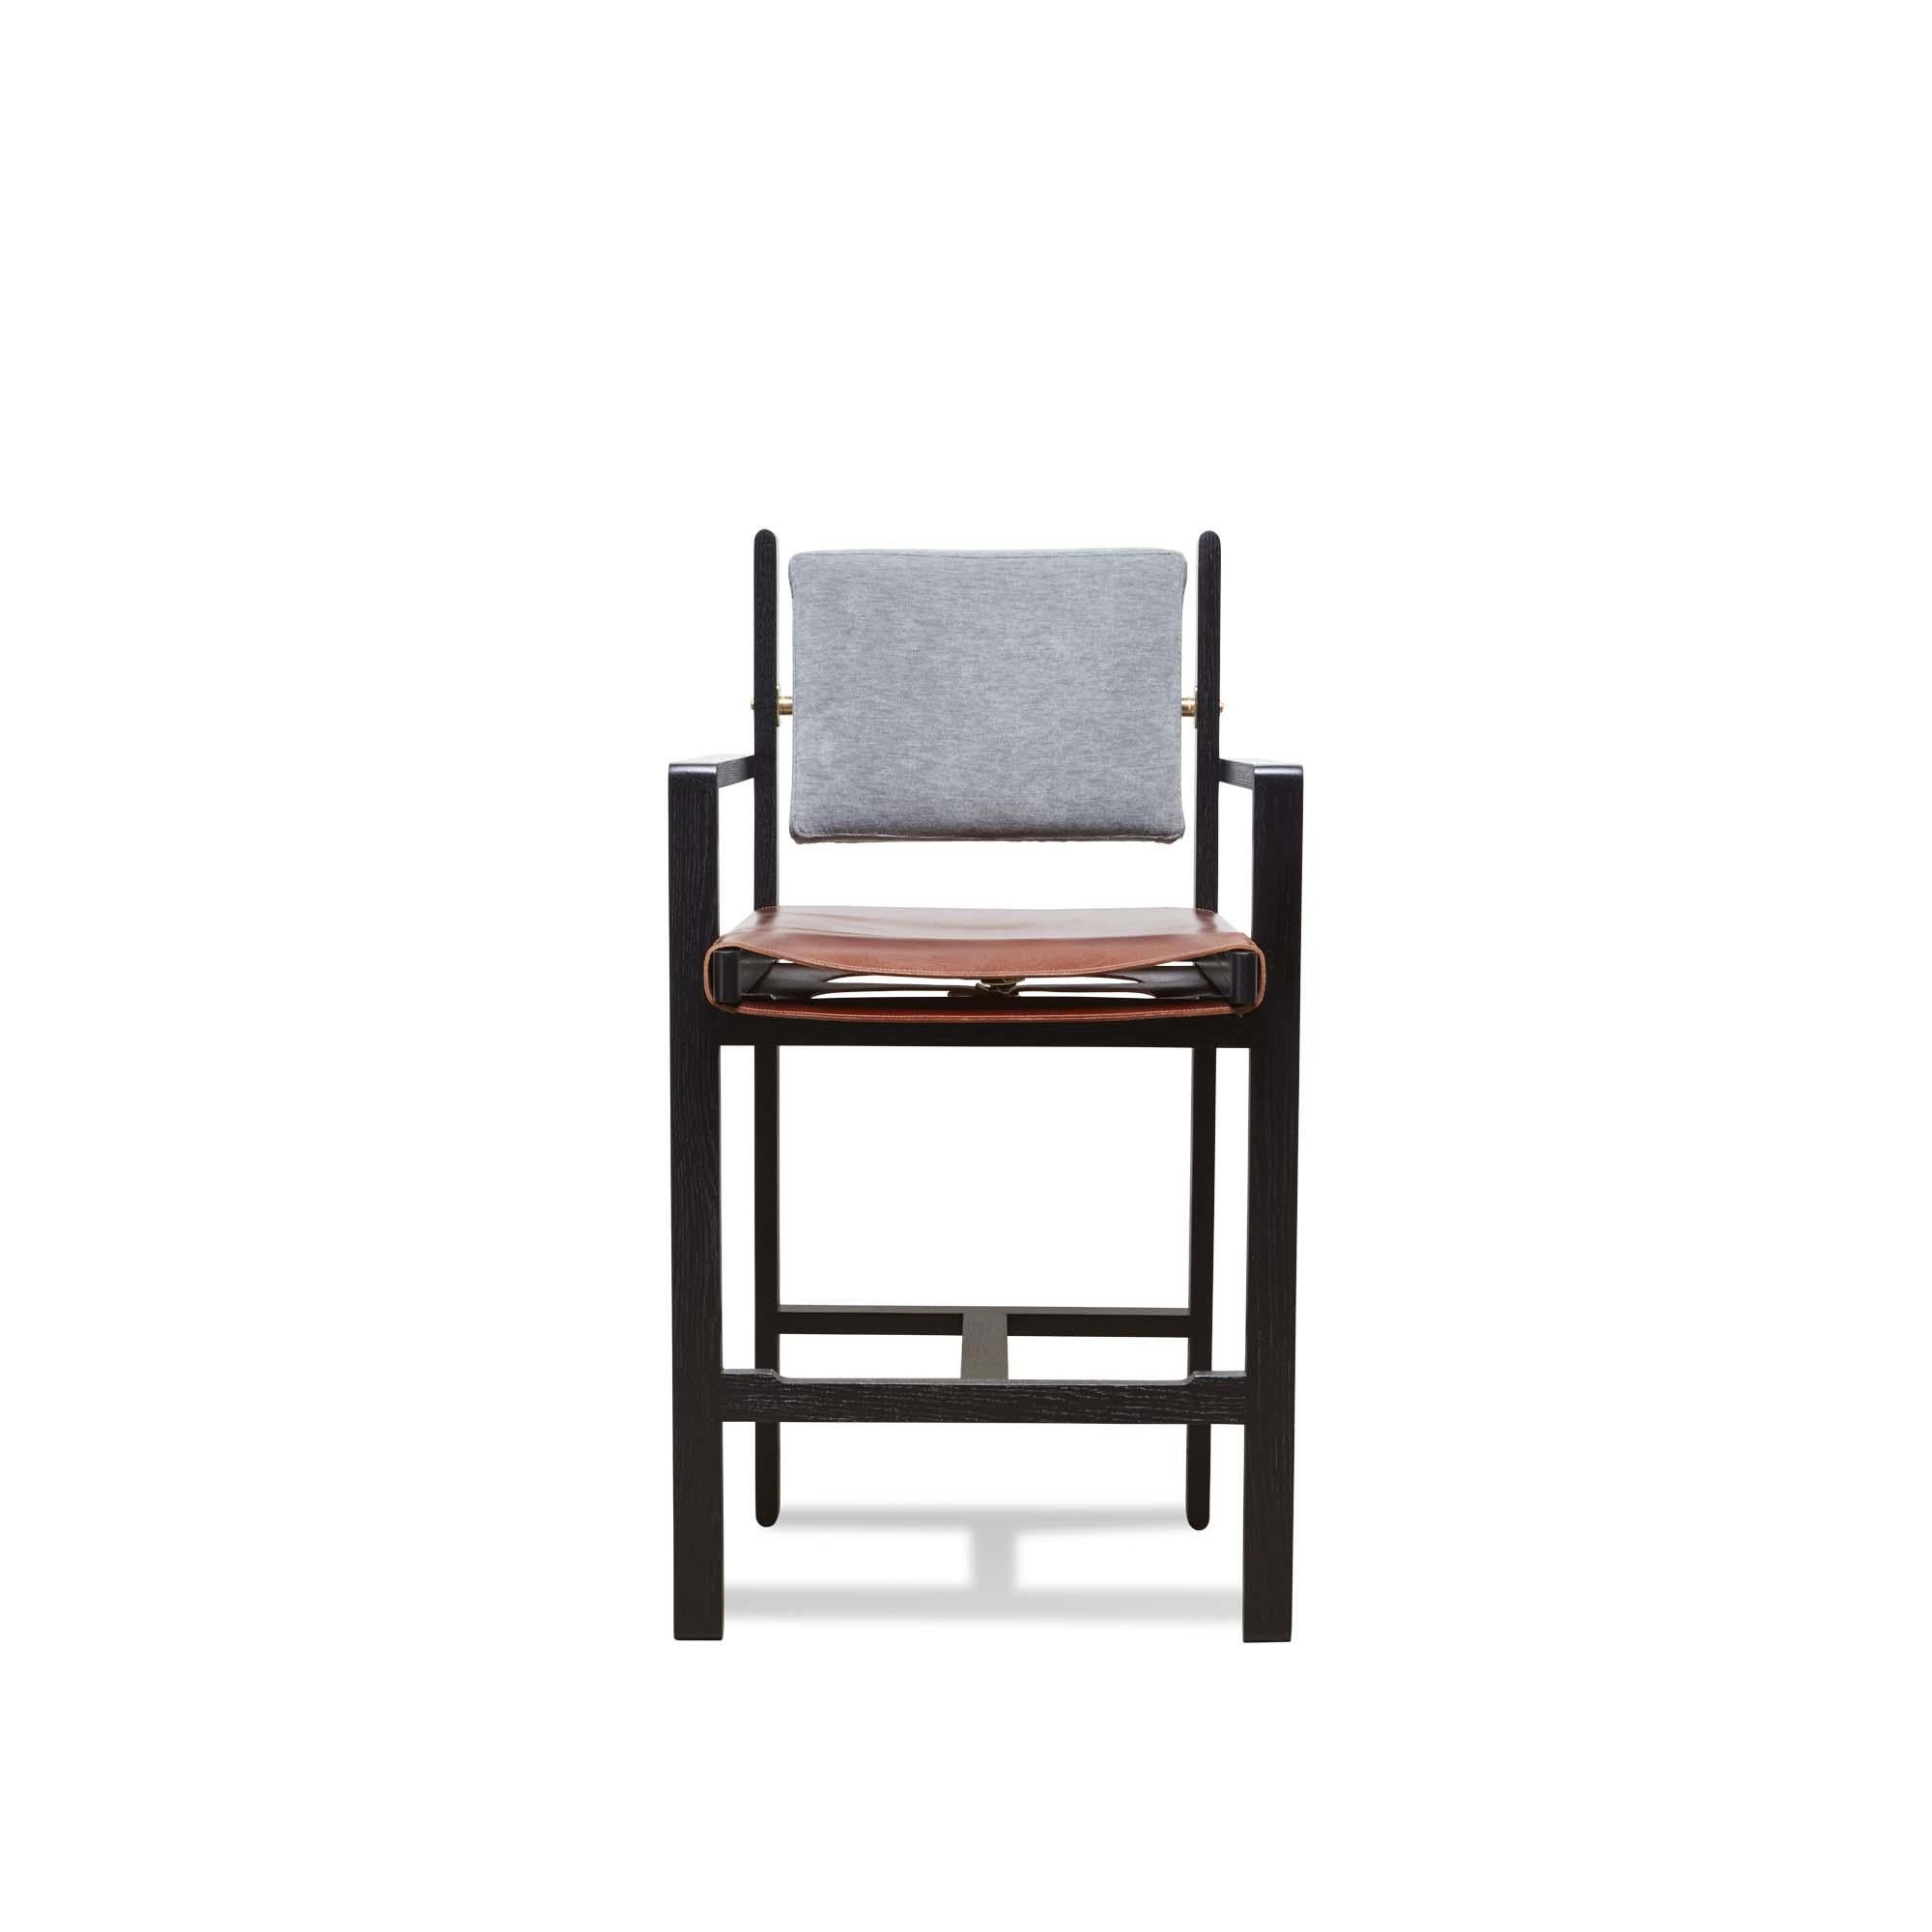 The Morro Barstool is made from a solid walnut or oak frame and features an upholstered back cushion and a leather sling seat. An optional loose seat cushion is also available. Inspired by the articulated connections of Bauhaus